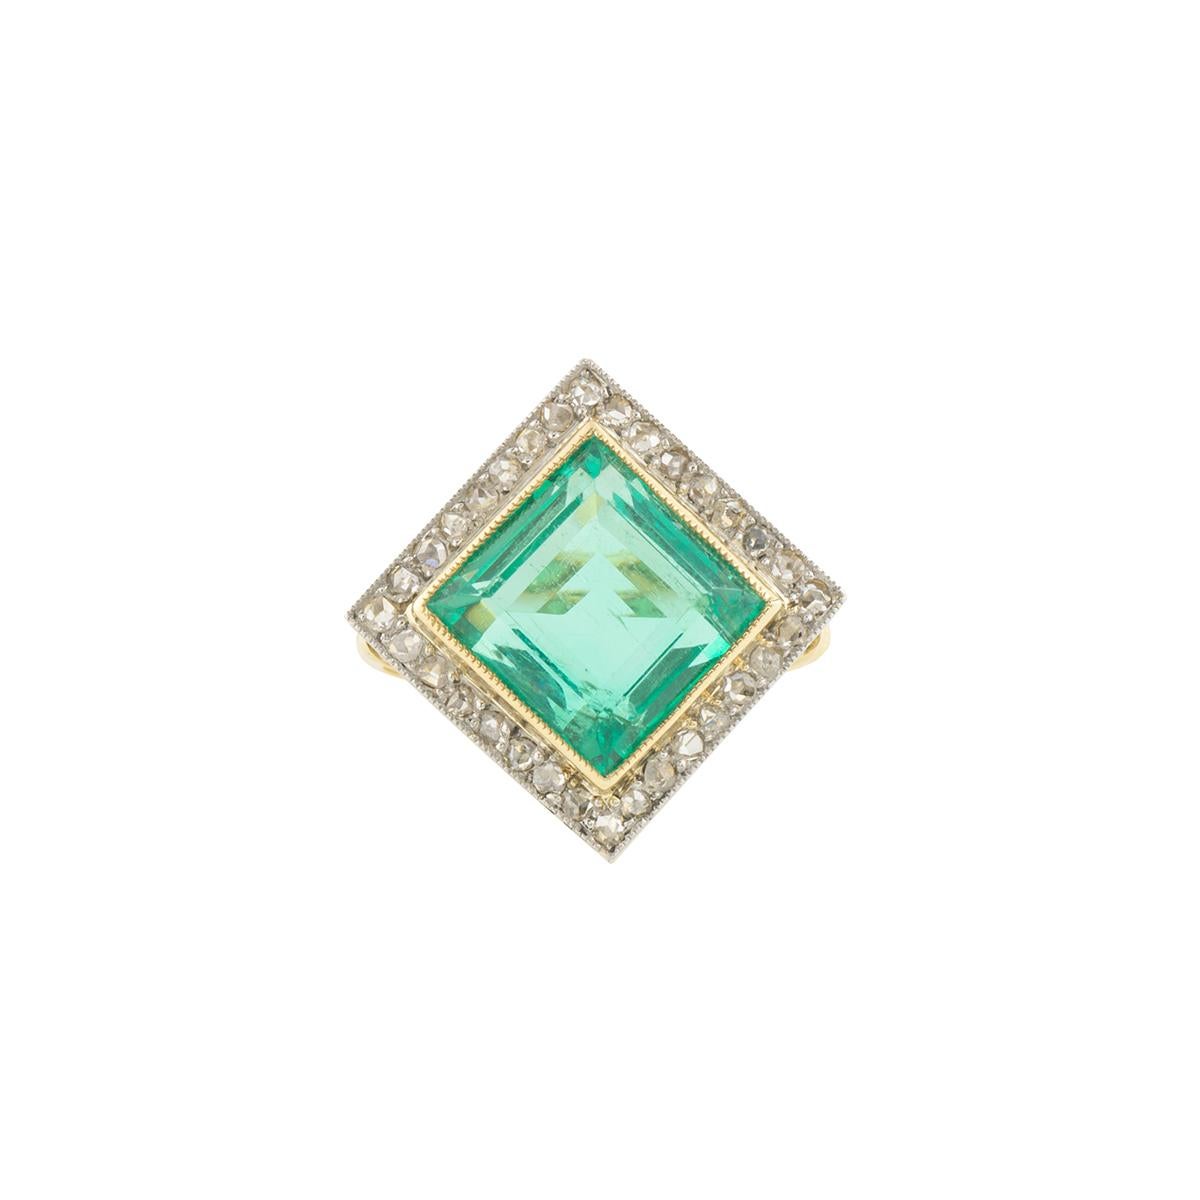 A luxurious 18k yellow gold emerald and diamond dress ring. The ring comprises of a princess cut emerald in a rubover setting approximately 5.50ct with a light green hue throughout. Complementing this are 32 rose cut diamonds with an approximate